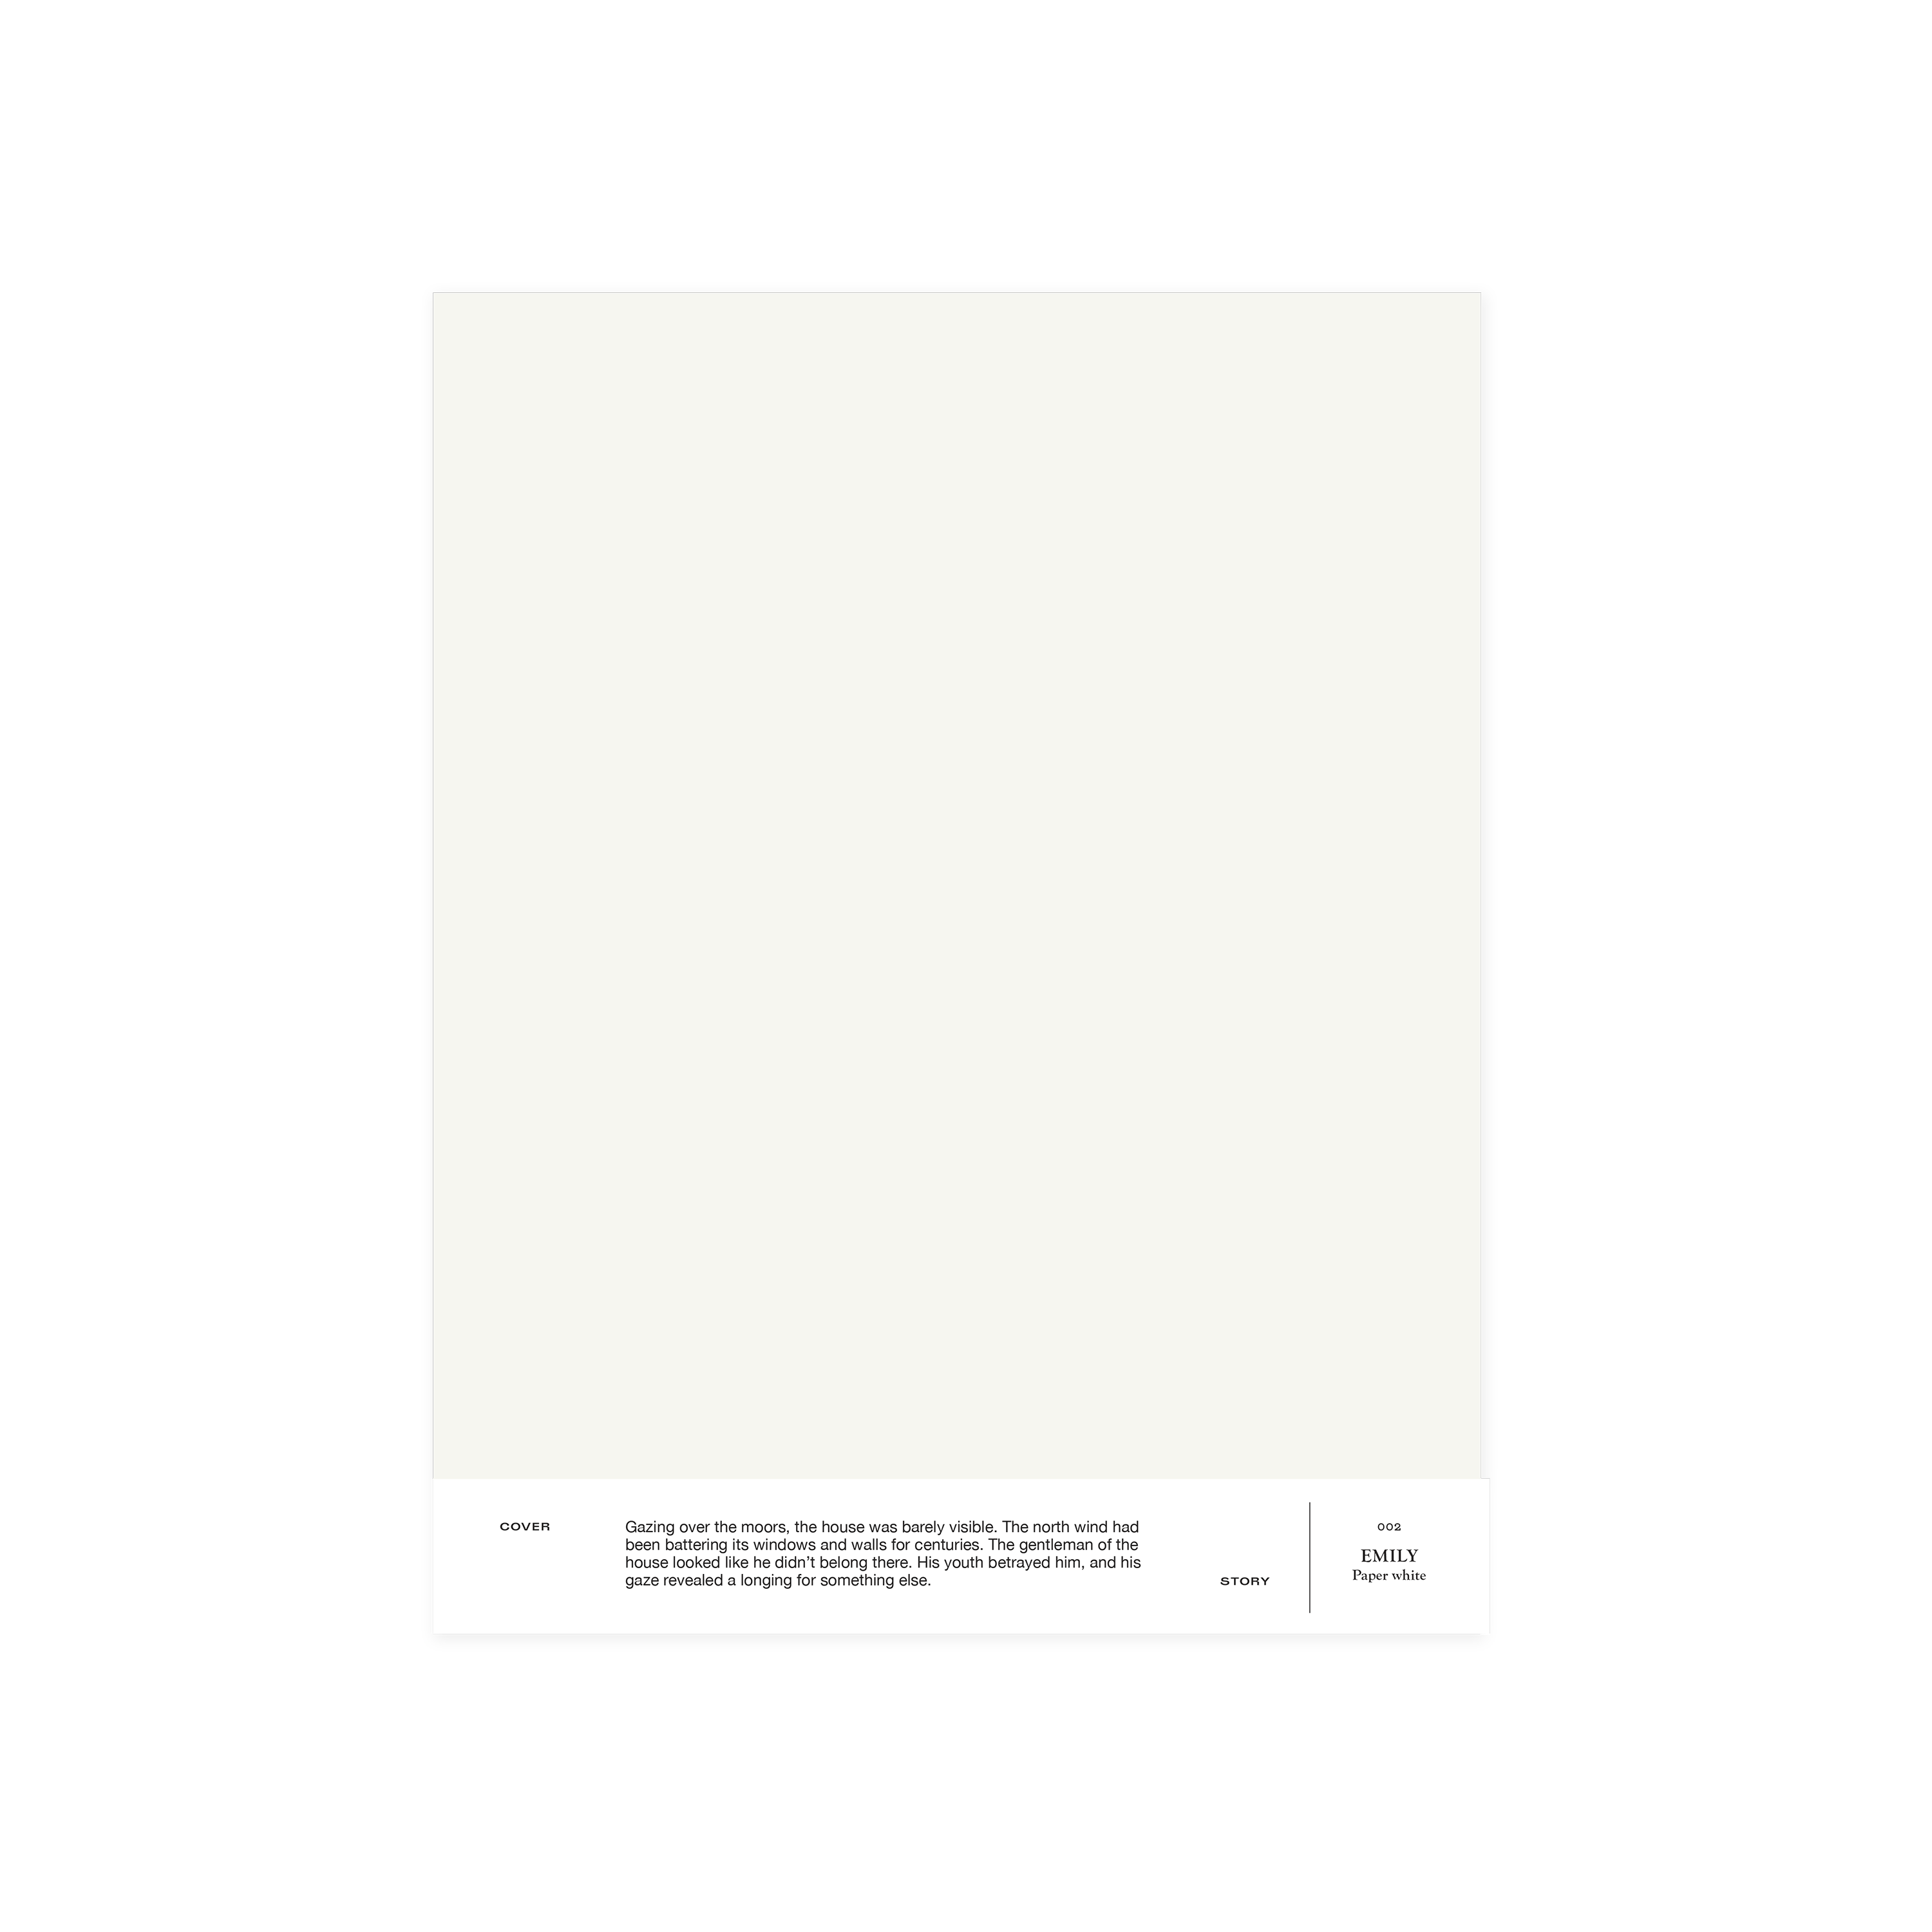 Paper white interior paint Cover Story 002 EMILY